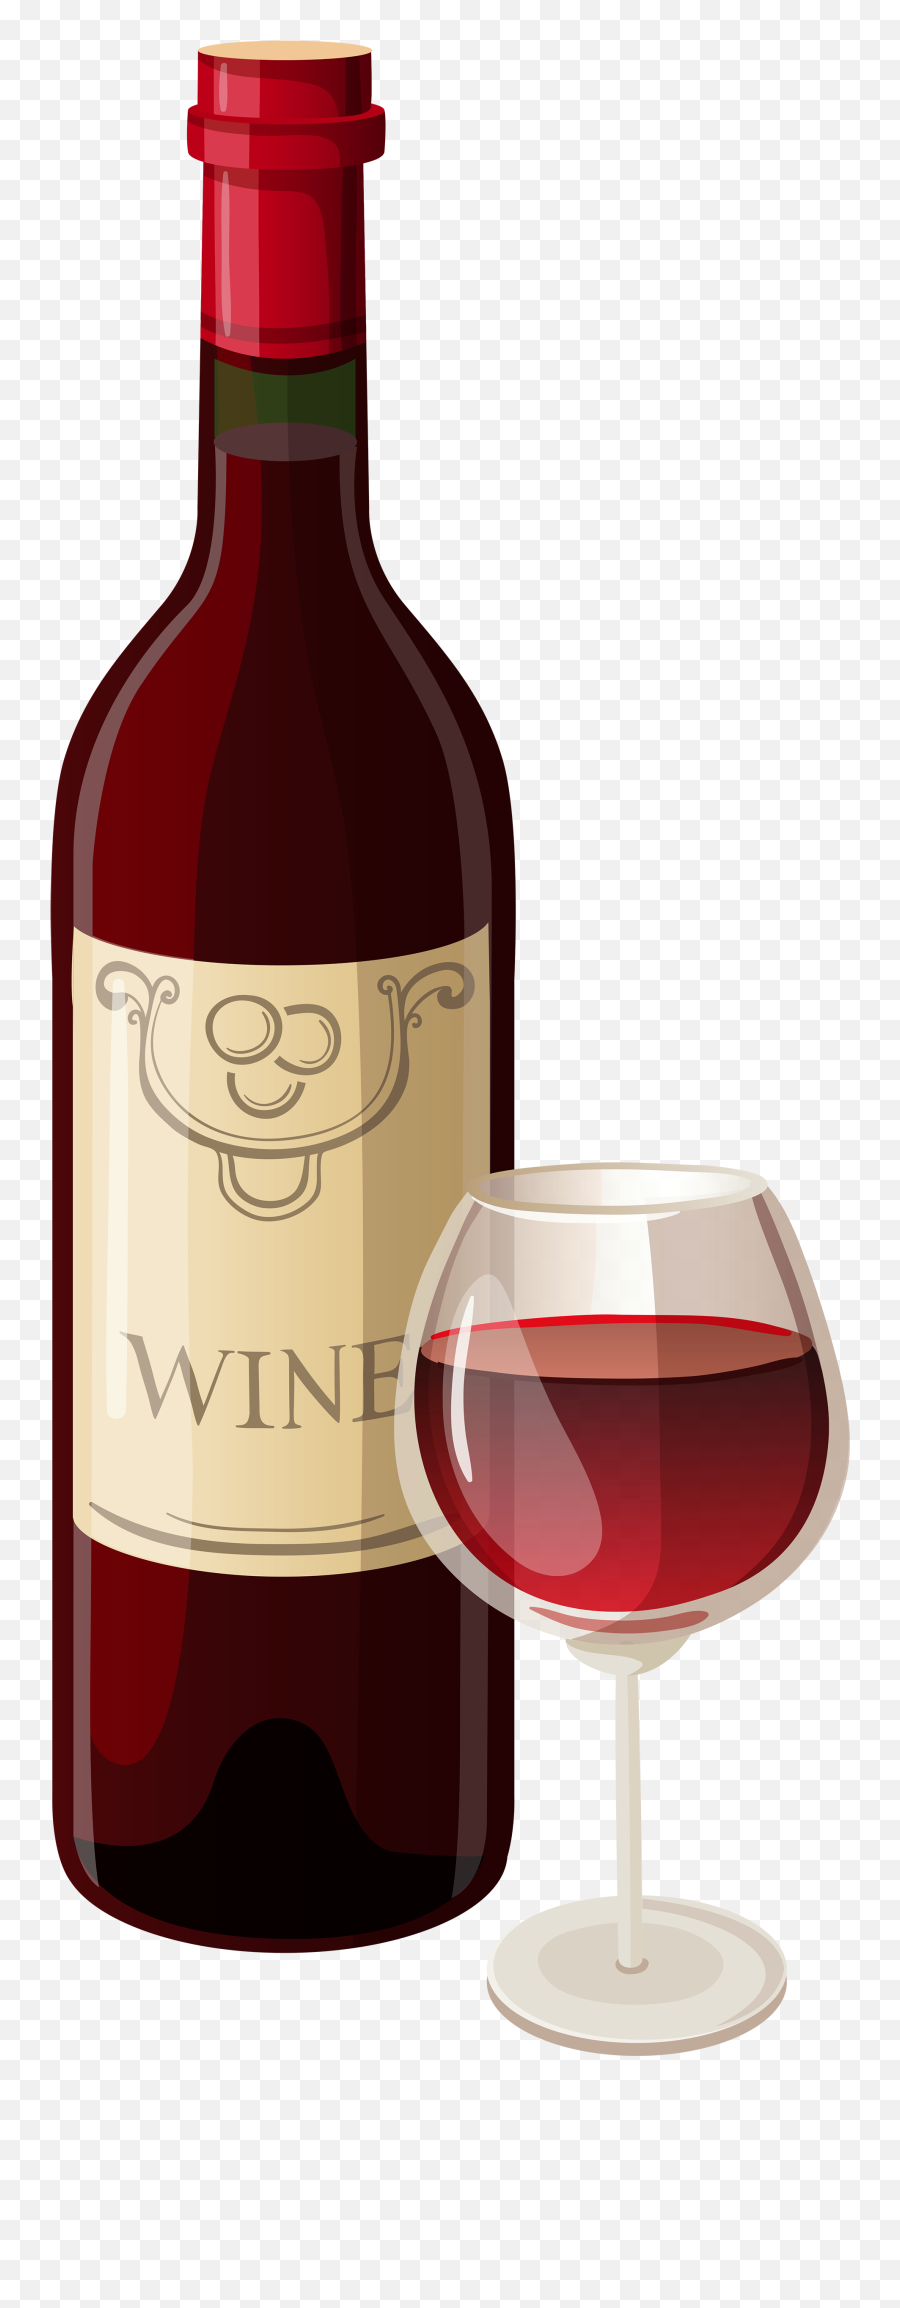 Wine Bottle And Glass Vector Clipart - Red Wine Bottle Png Emoji,Wine Bottle Emoji